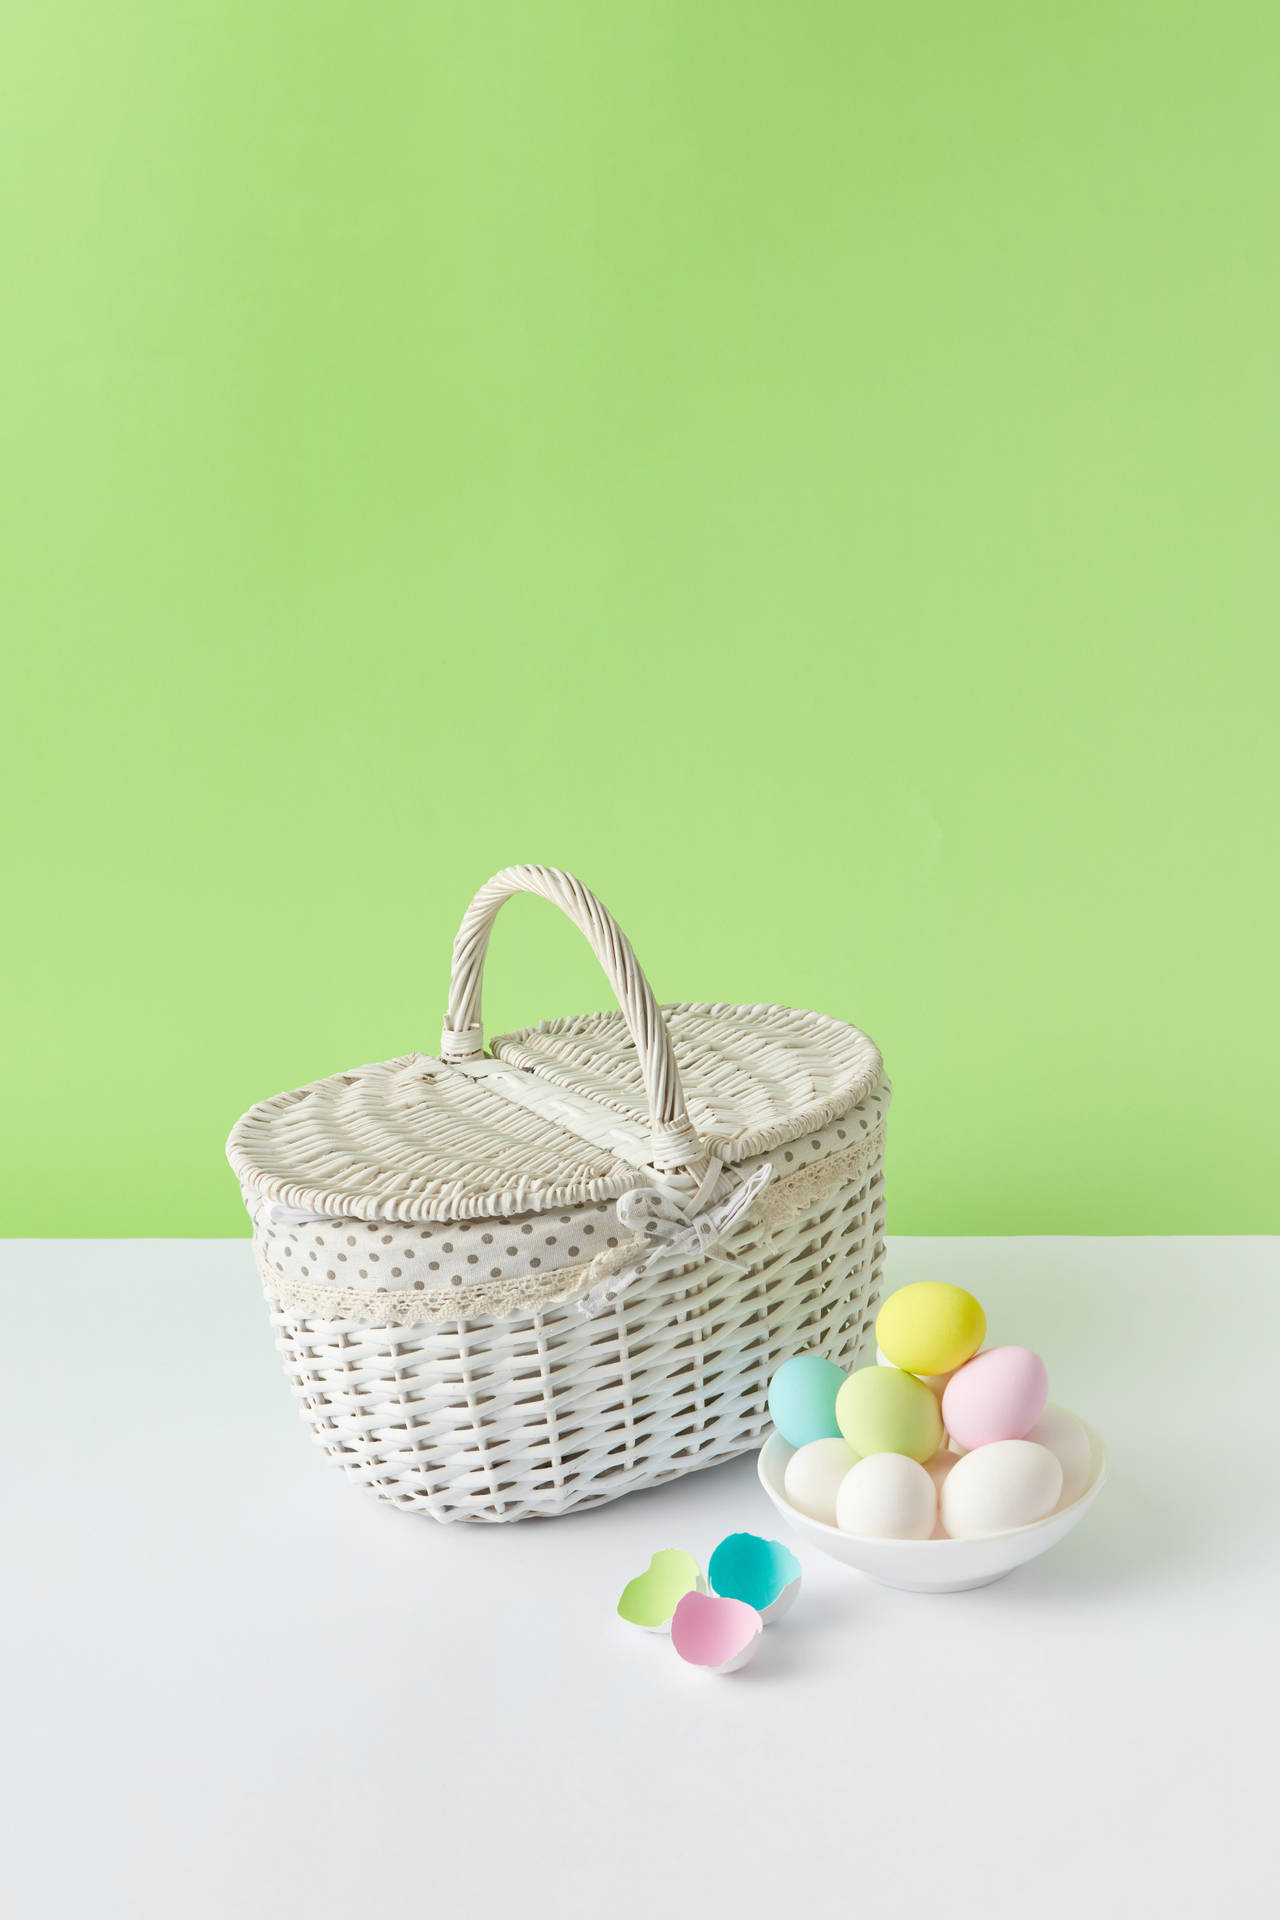 Basket And Eggs In Cute Pastel Aesthetic